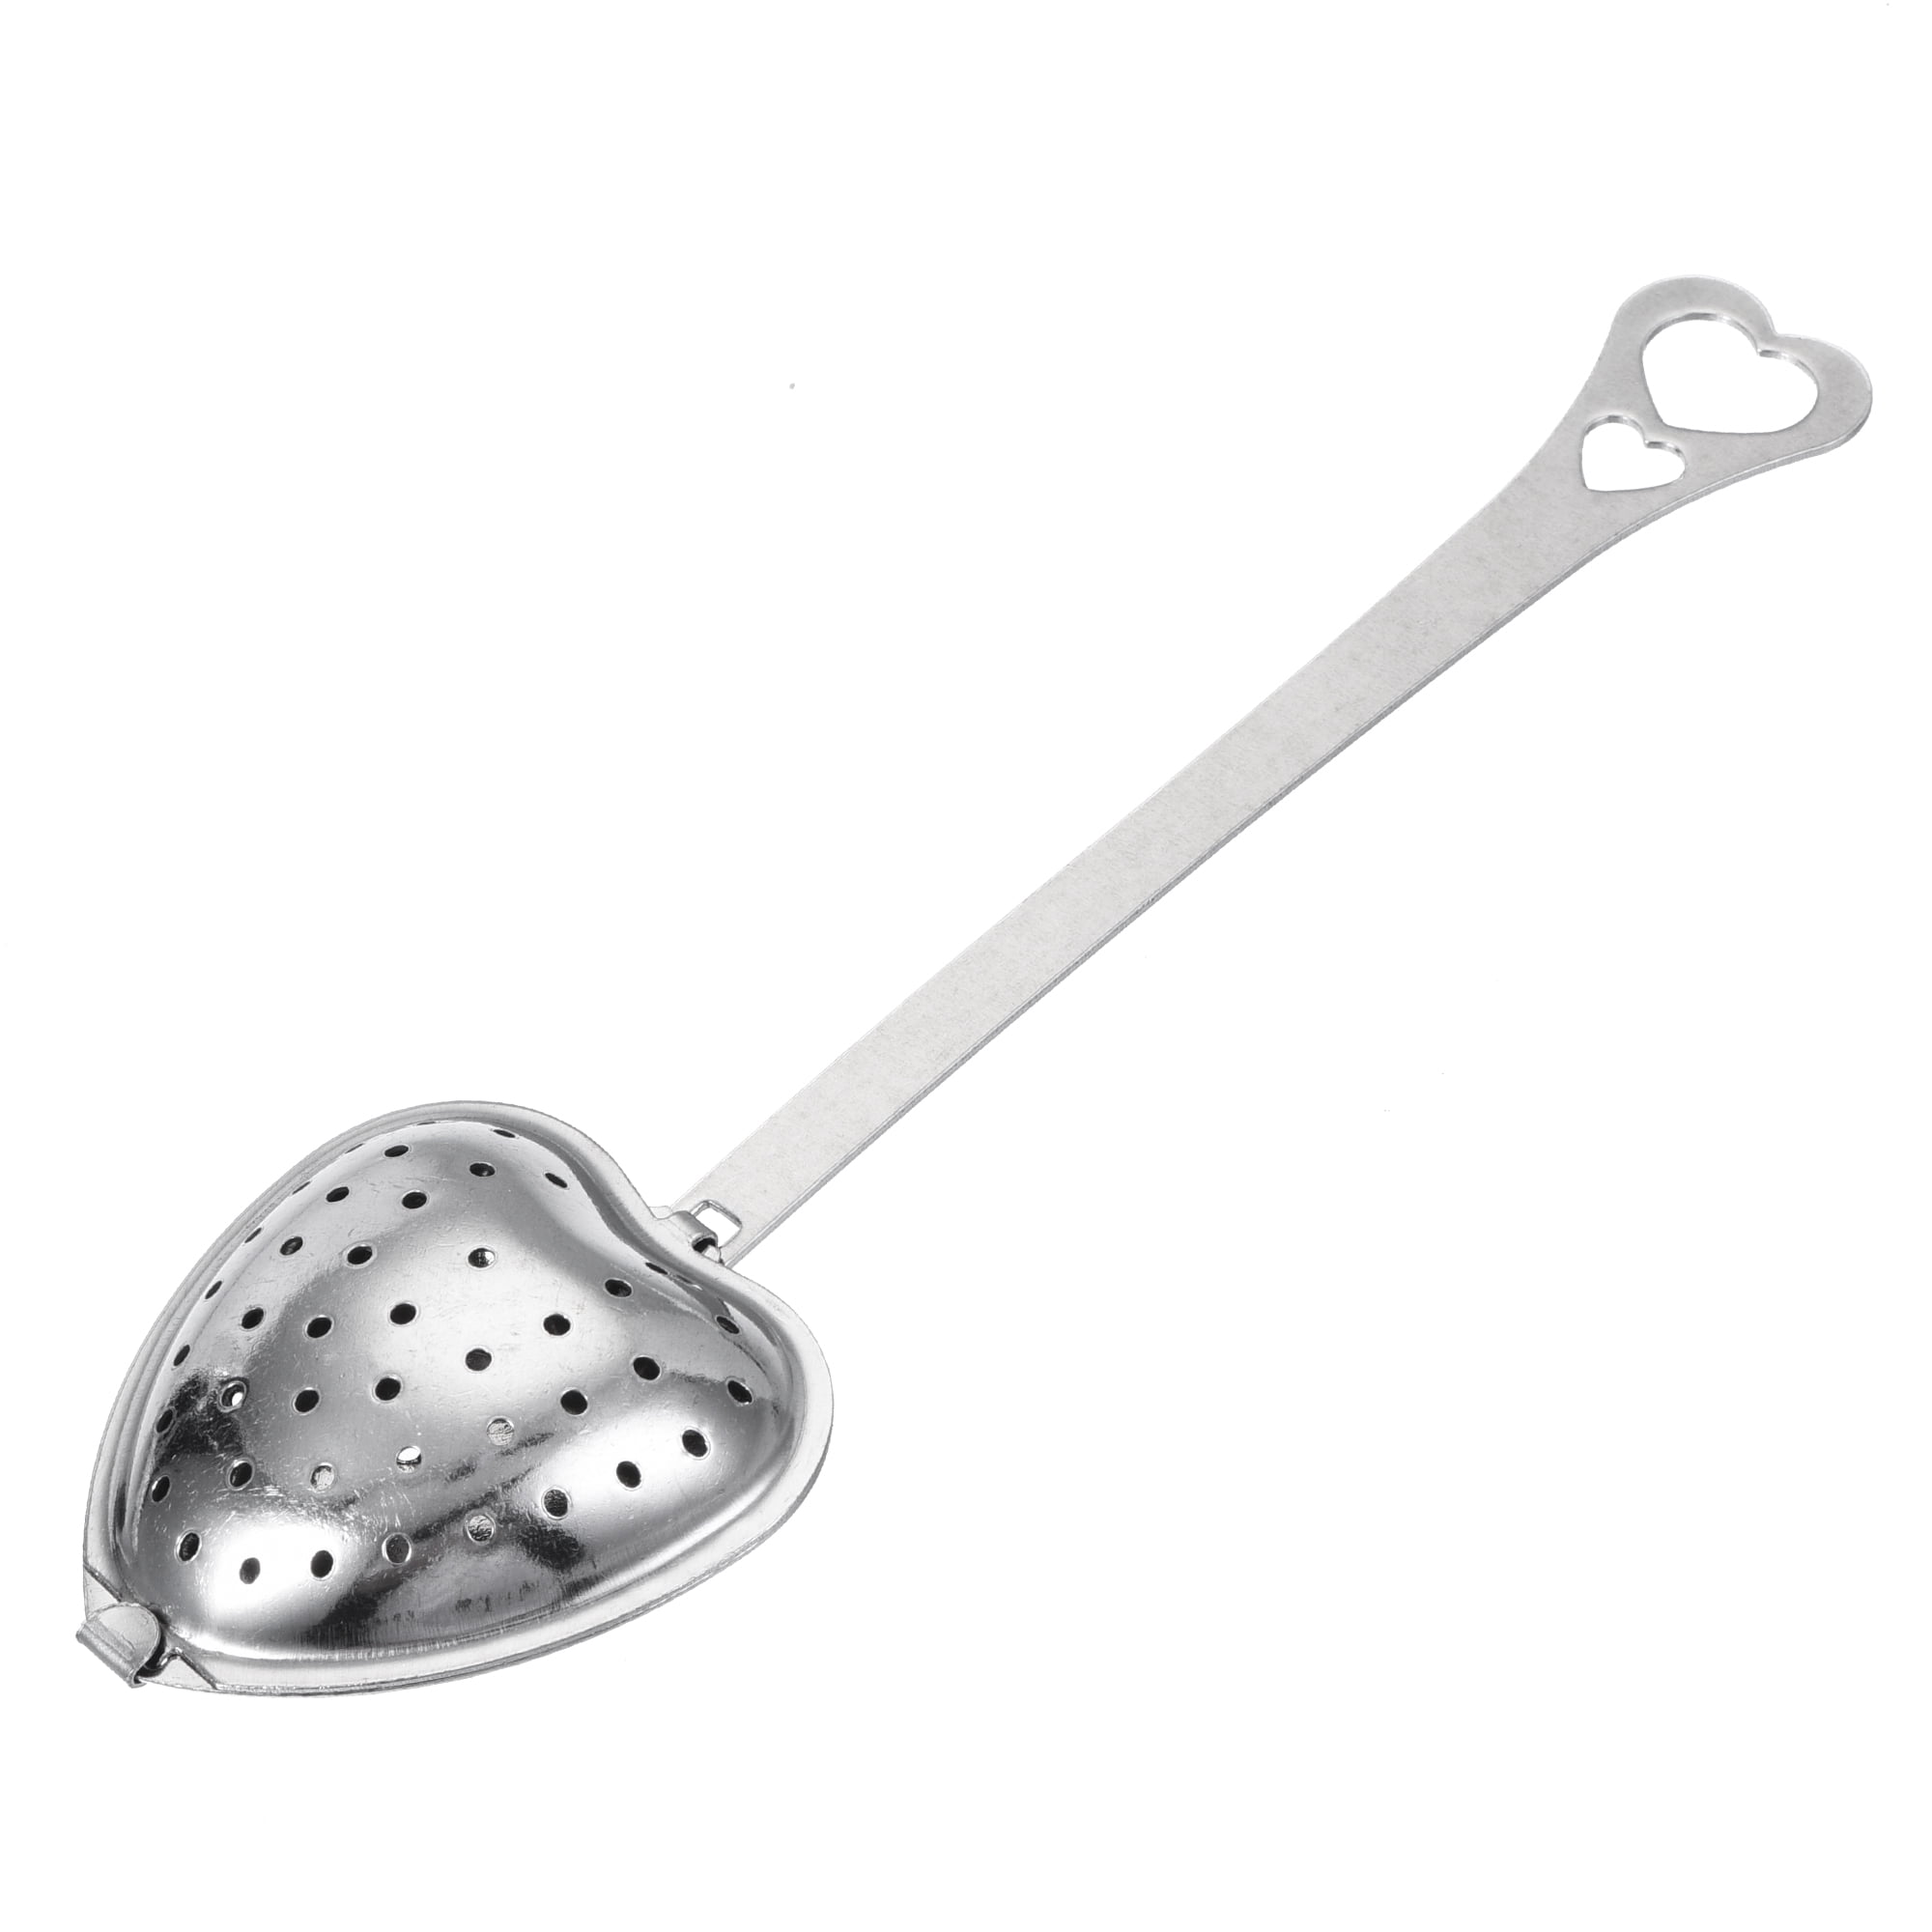 HarmonyHappy Heart Shaped Tea Strainer/Infuser/Spoon Push Style